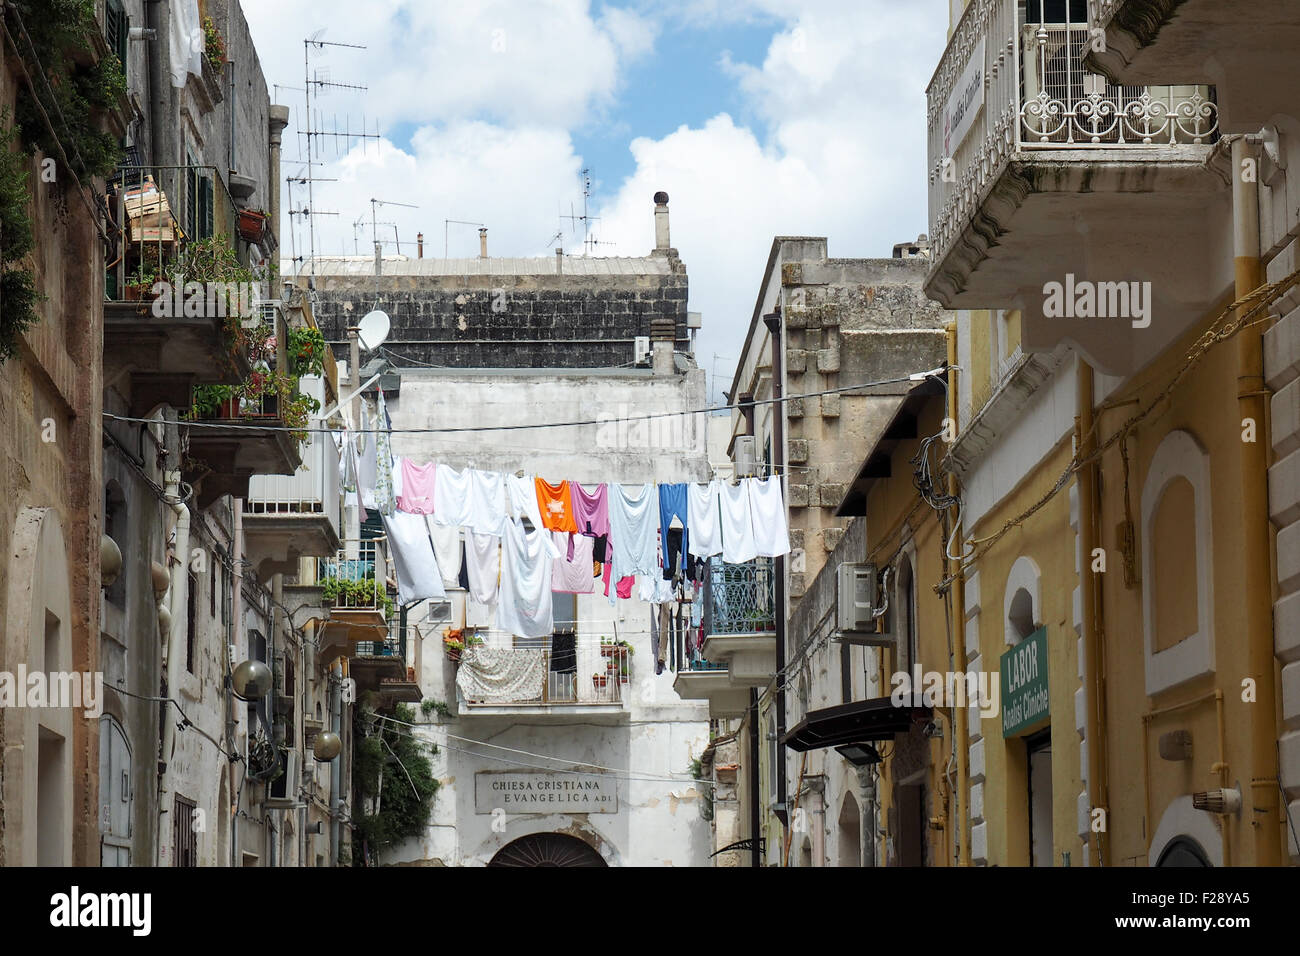 Clothes hanging out to dry on a clothesline across a street in Matera. Stock Photo